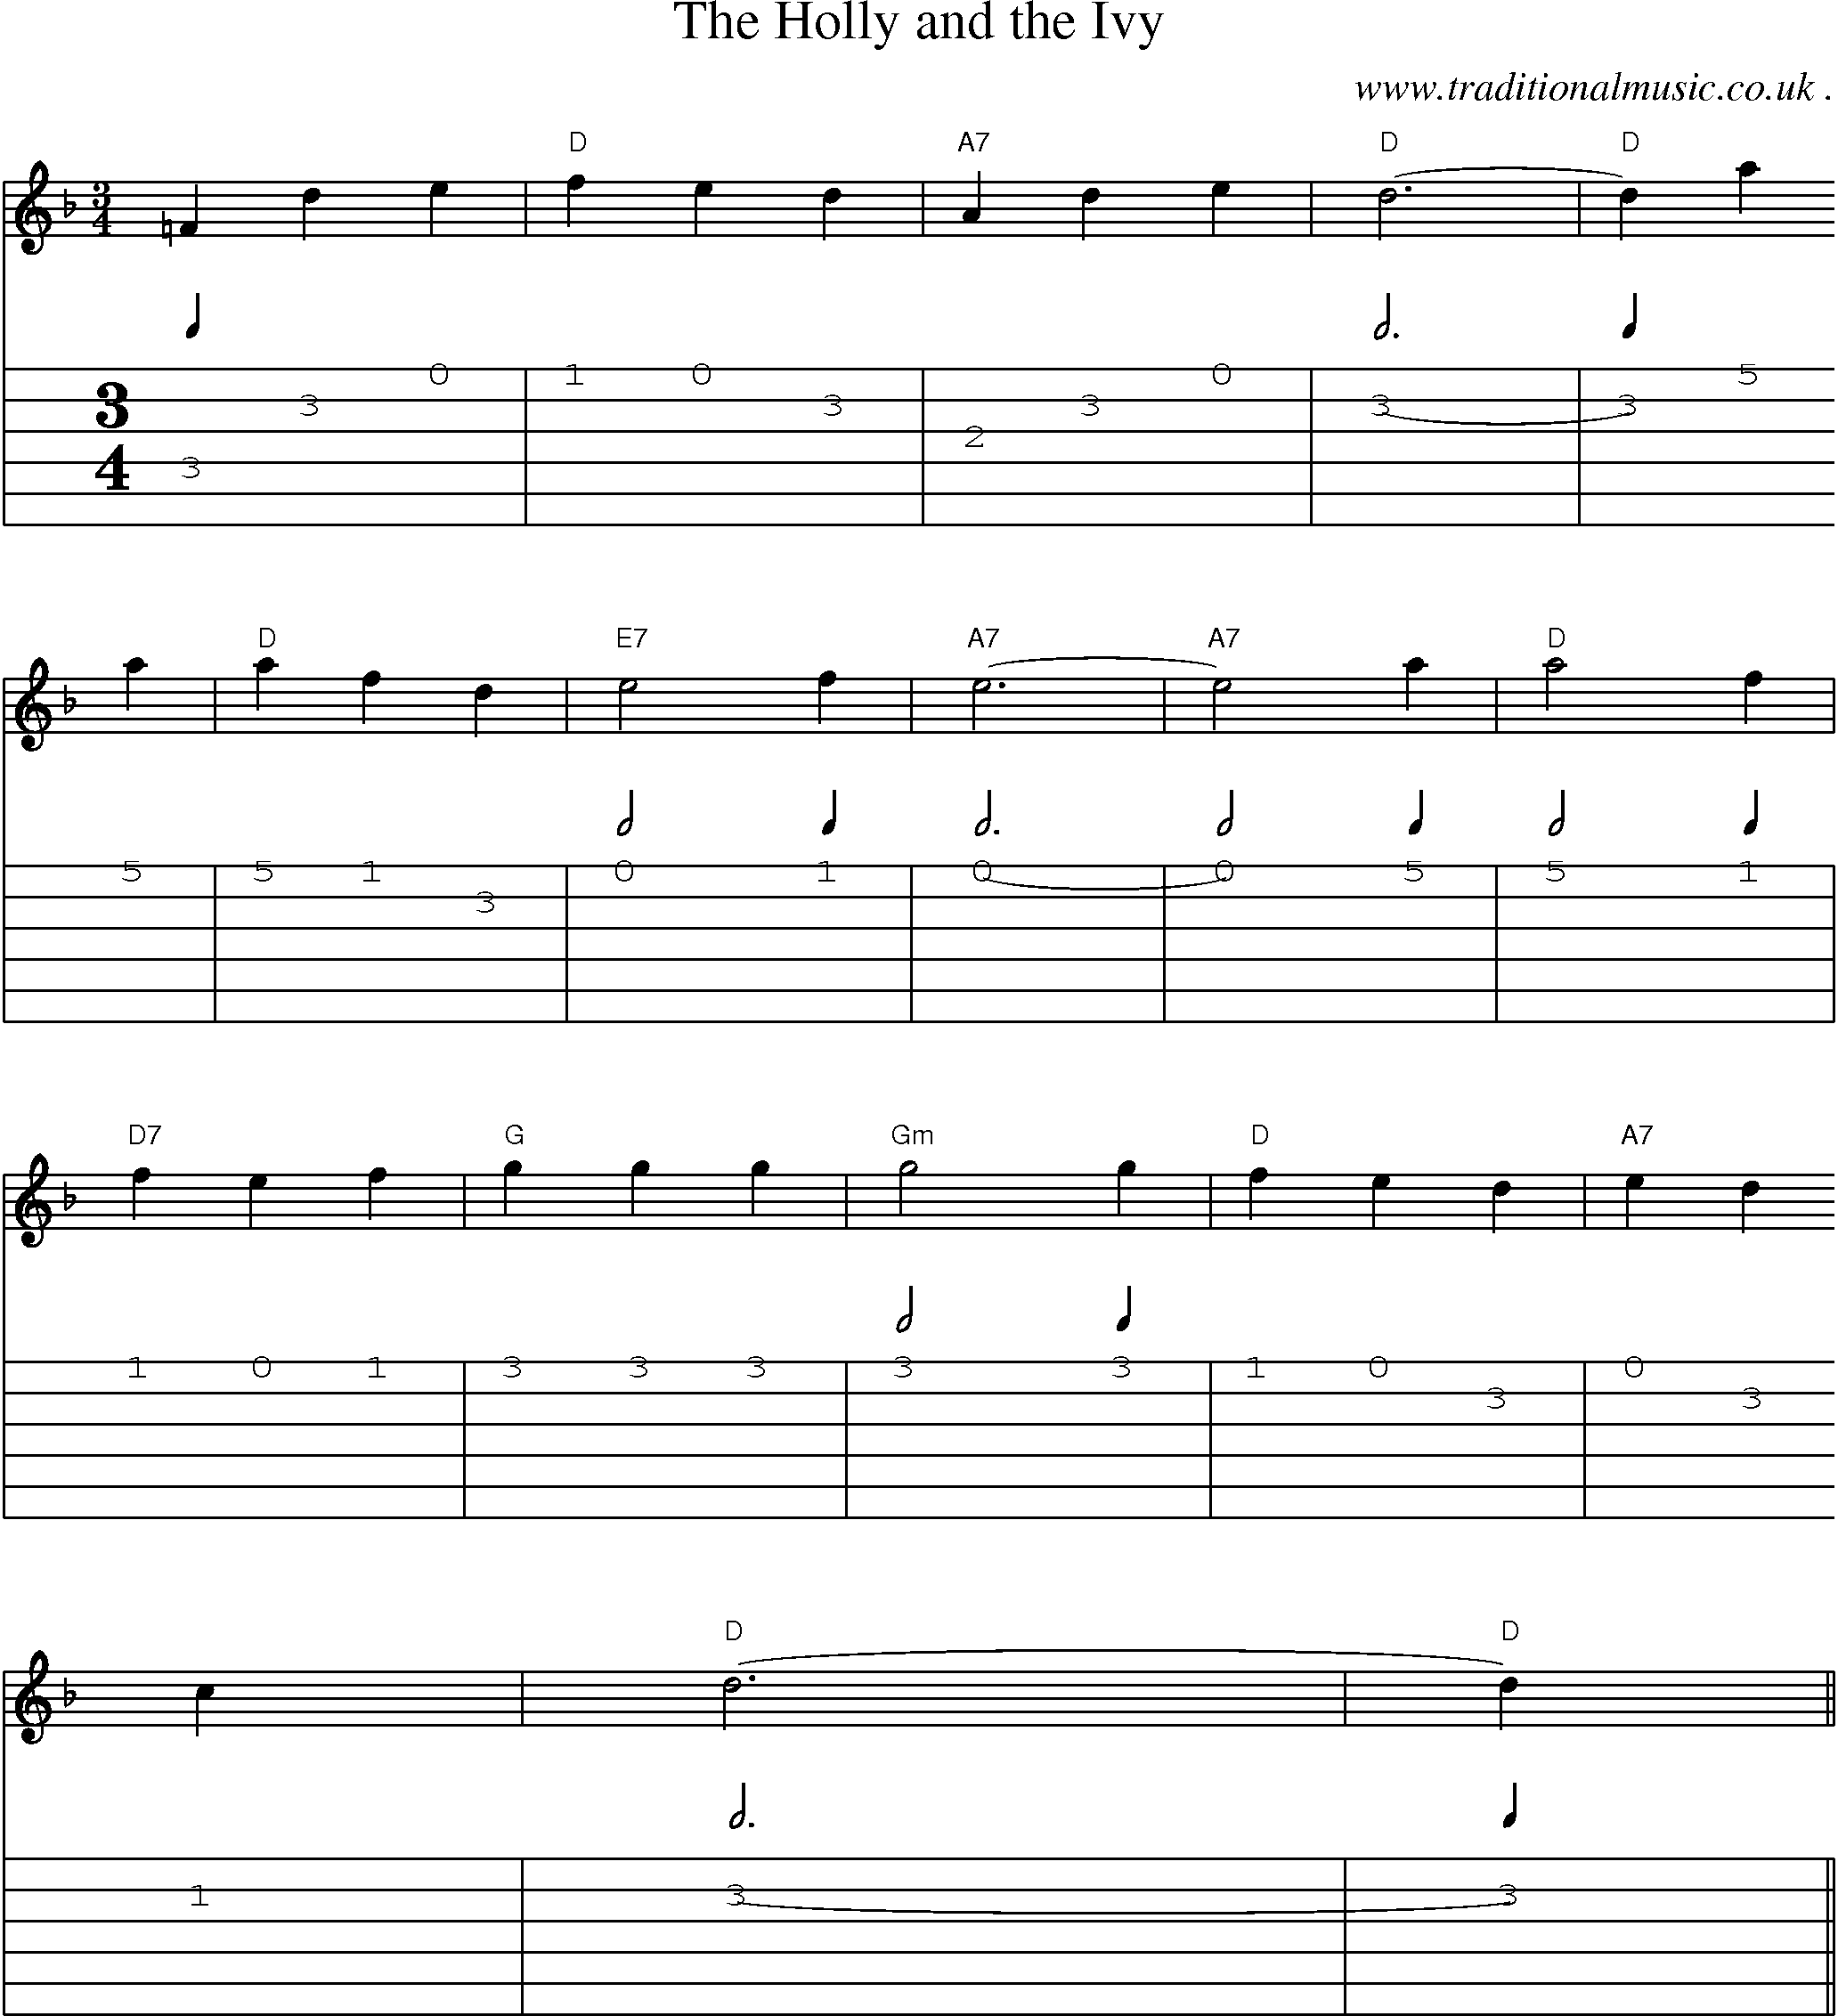 Sheet-Music and Guitar Tabs for The Holly And The Ivy